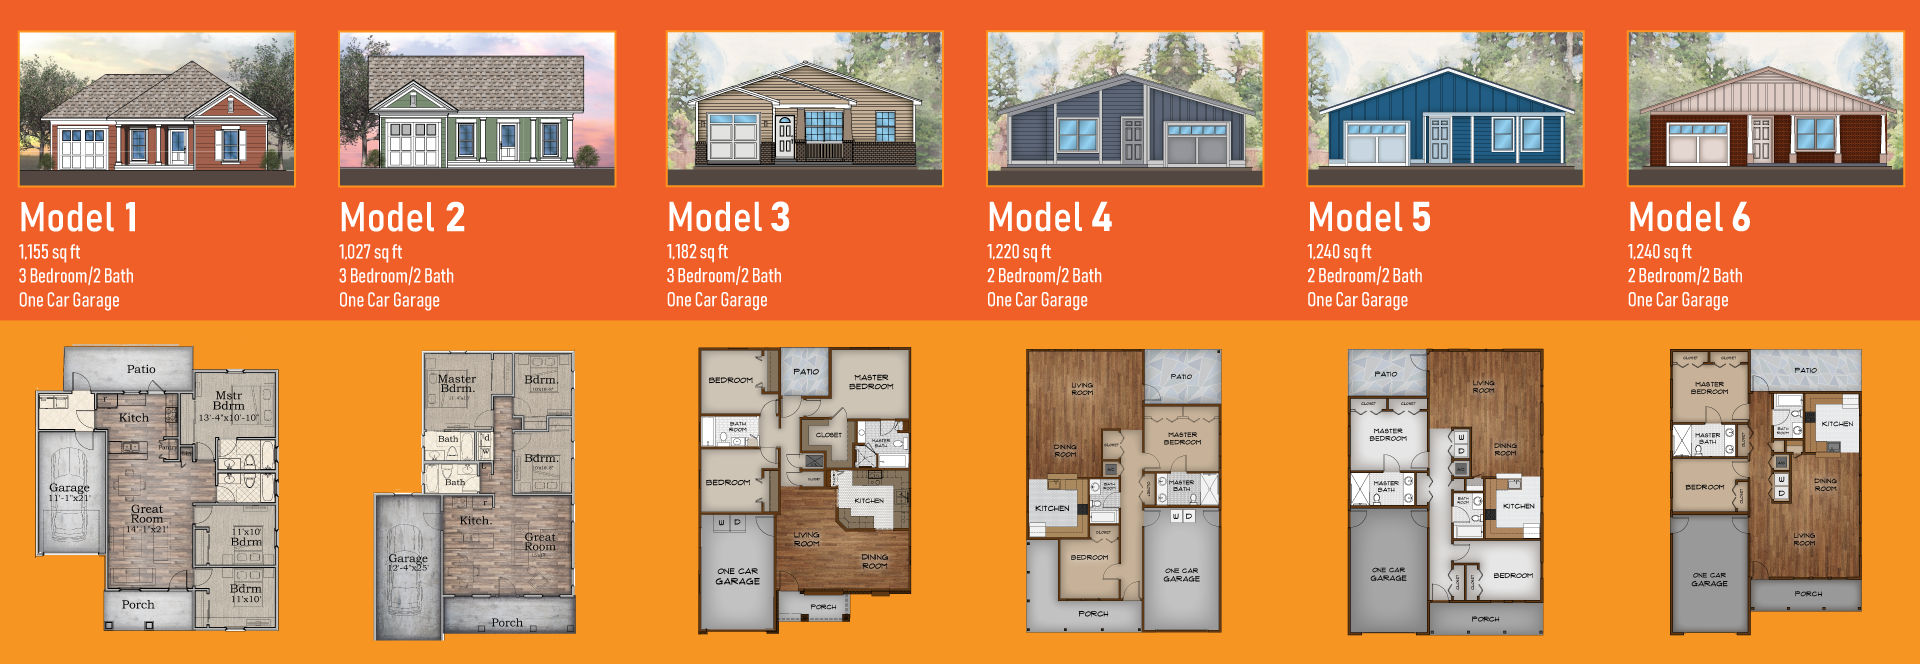 An image showing all 6 available house plans and renderings.